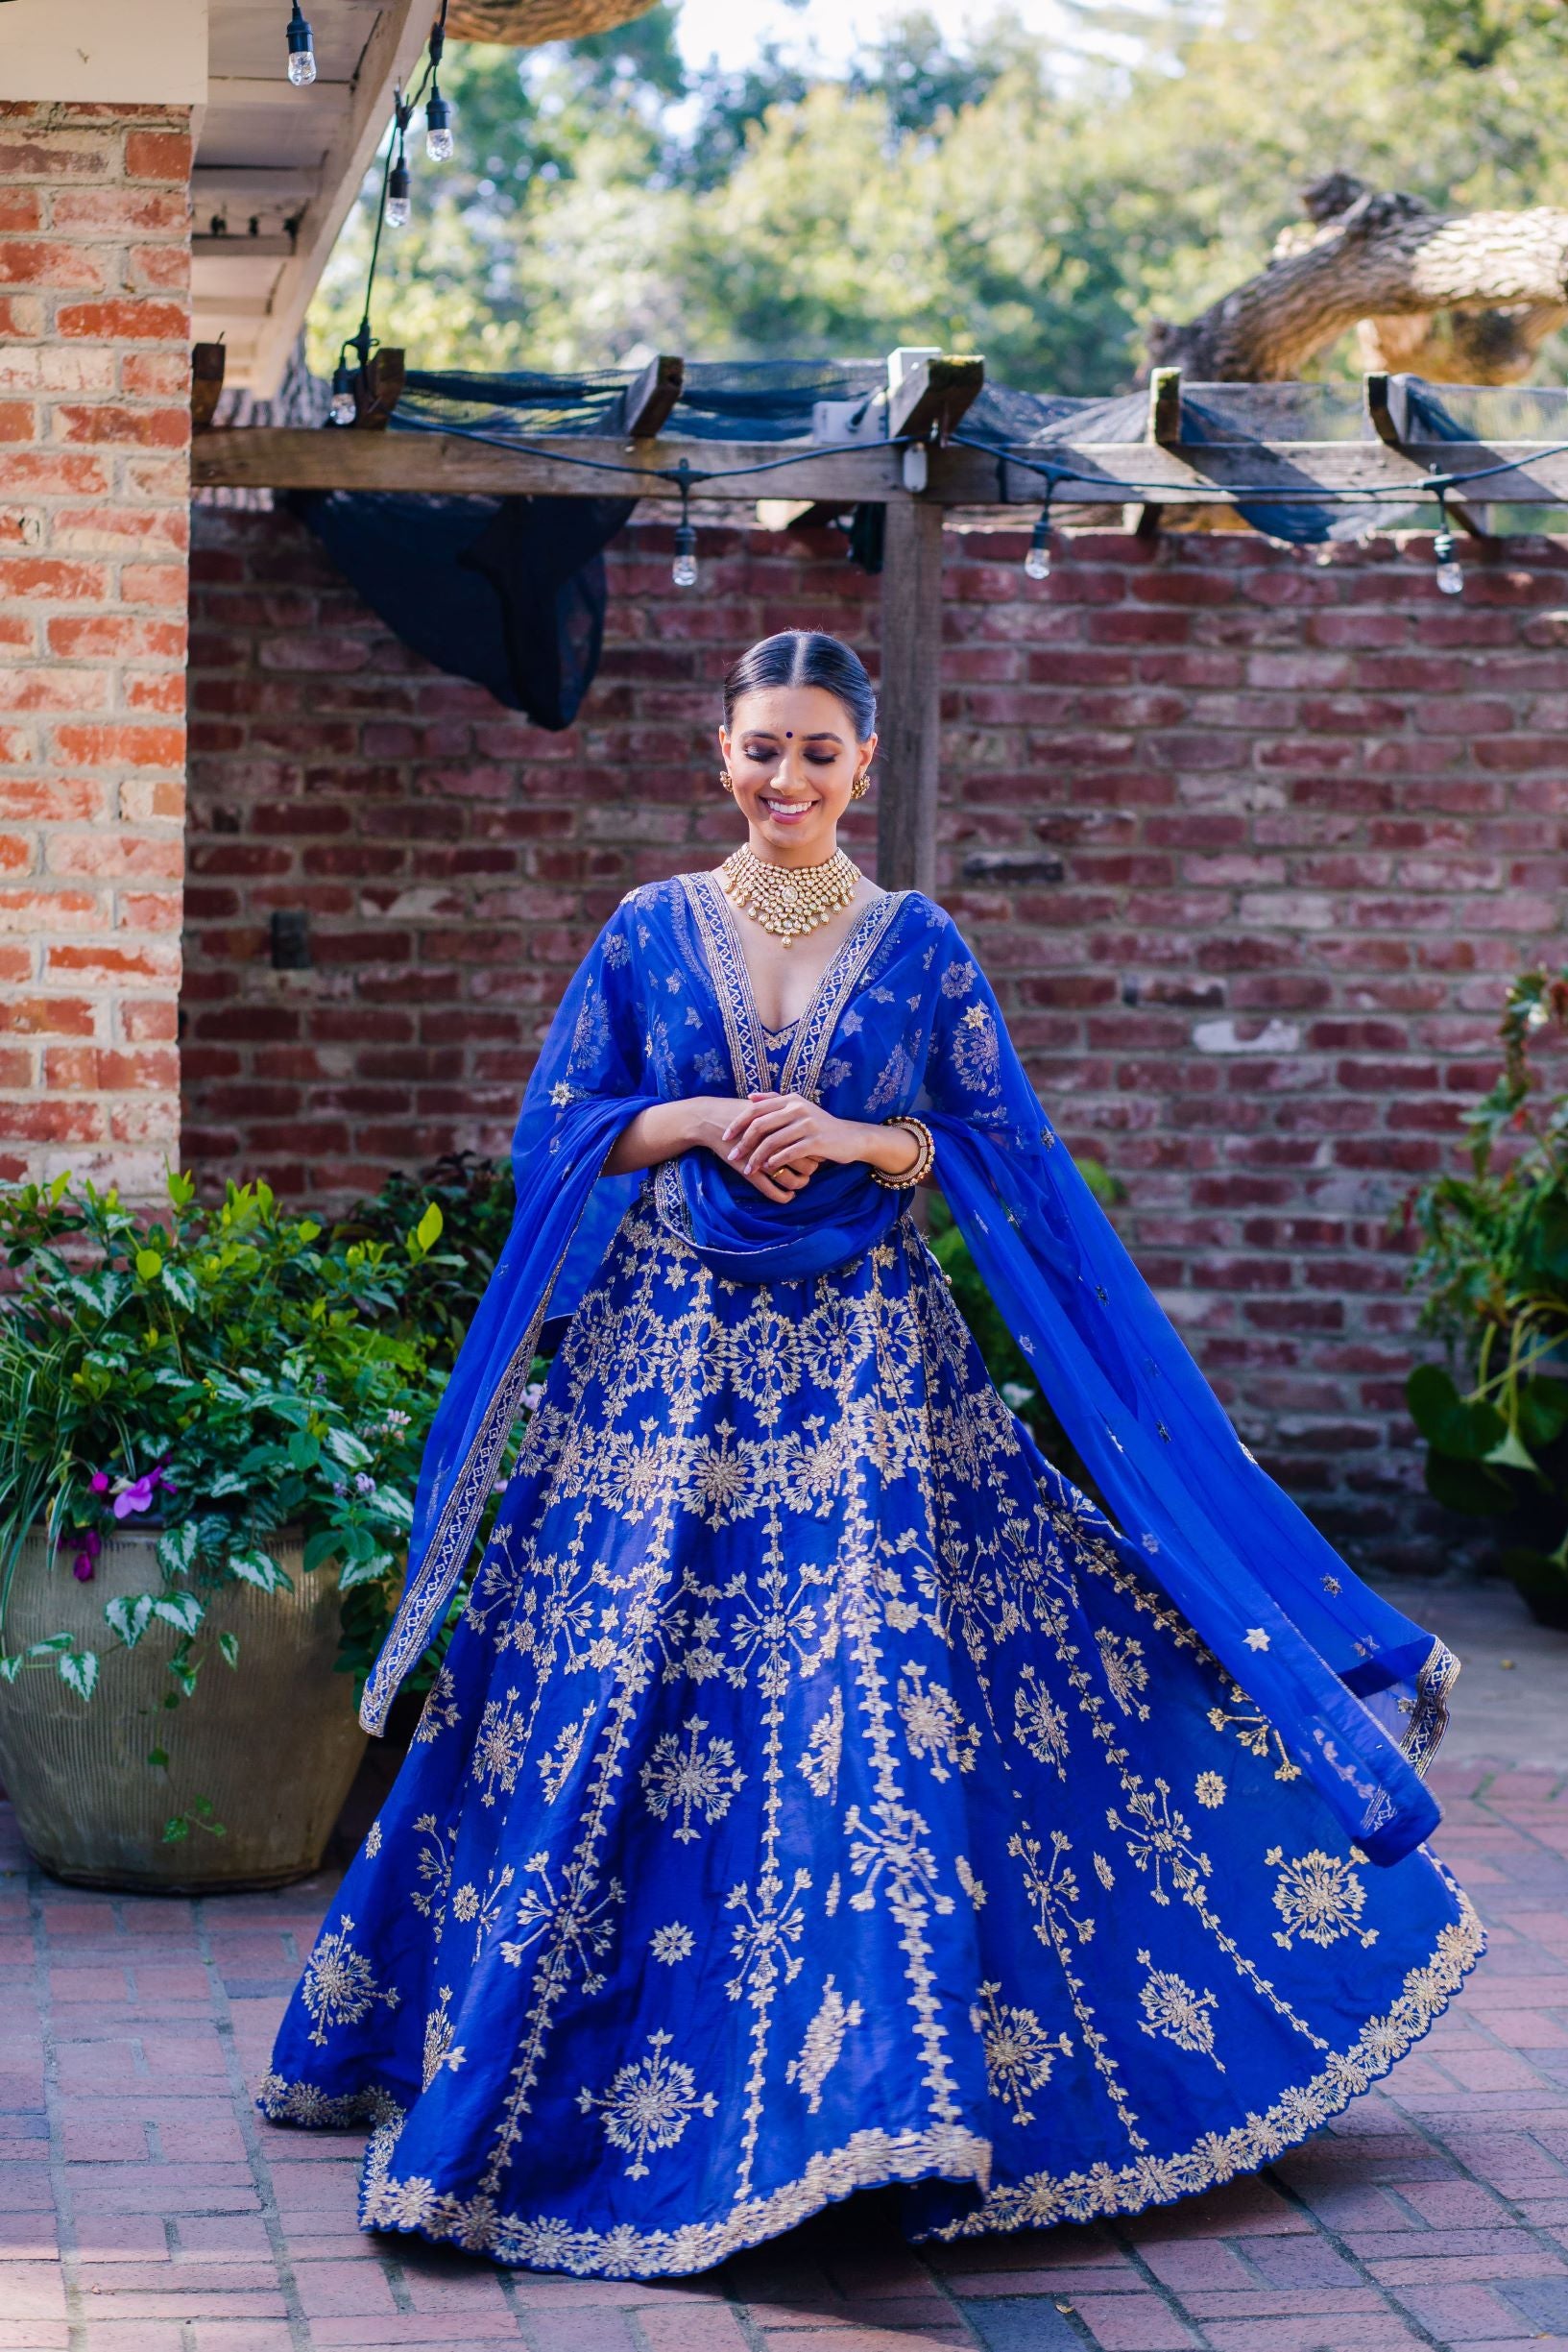 SHAN Wedding & Designer Clothes - Shan Wedding & Designer Studio here  represents one of our couple wearing royal blue lehenga and indowestern for  their engagement ceremony. It was our pleasure to